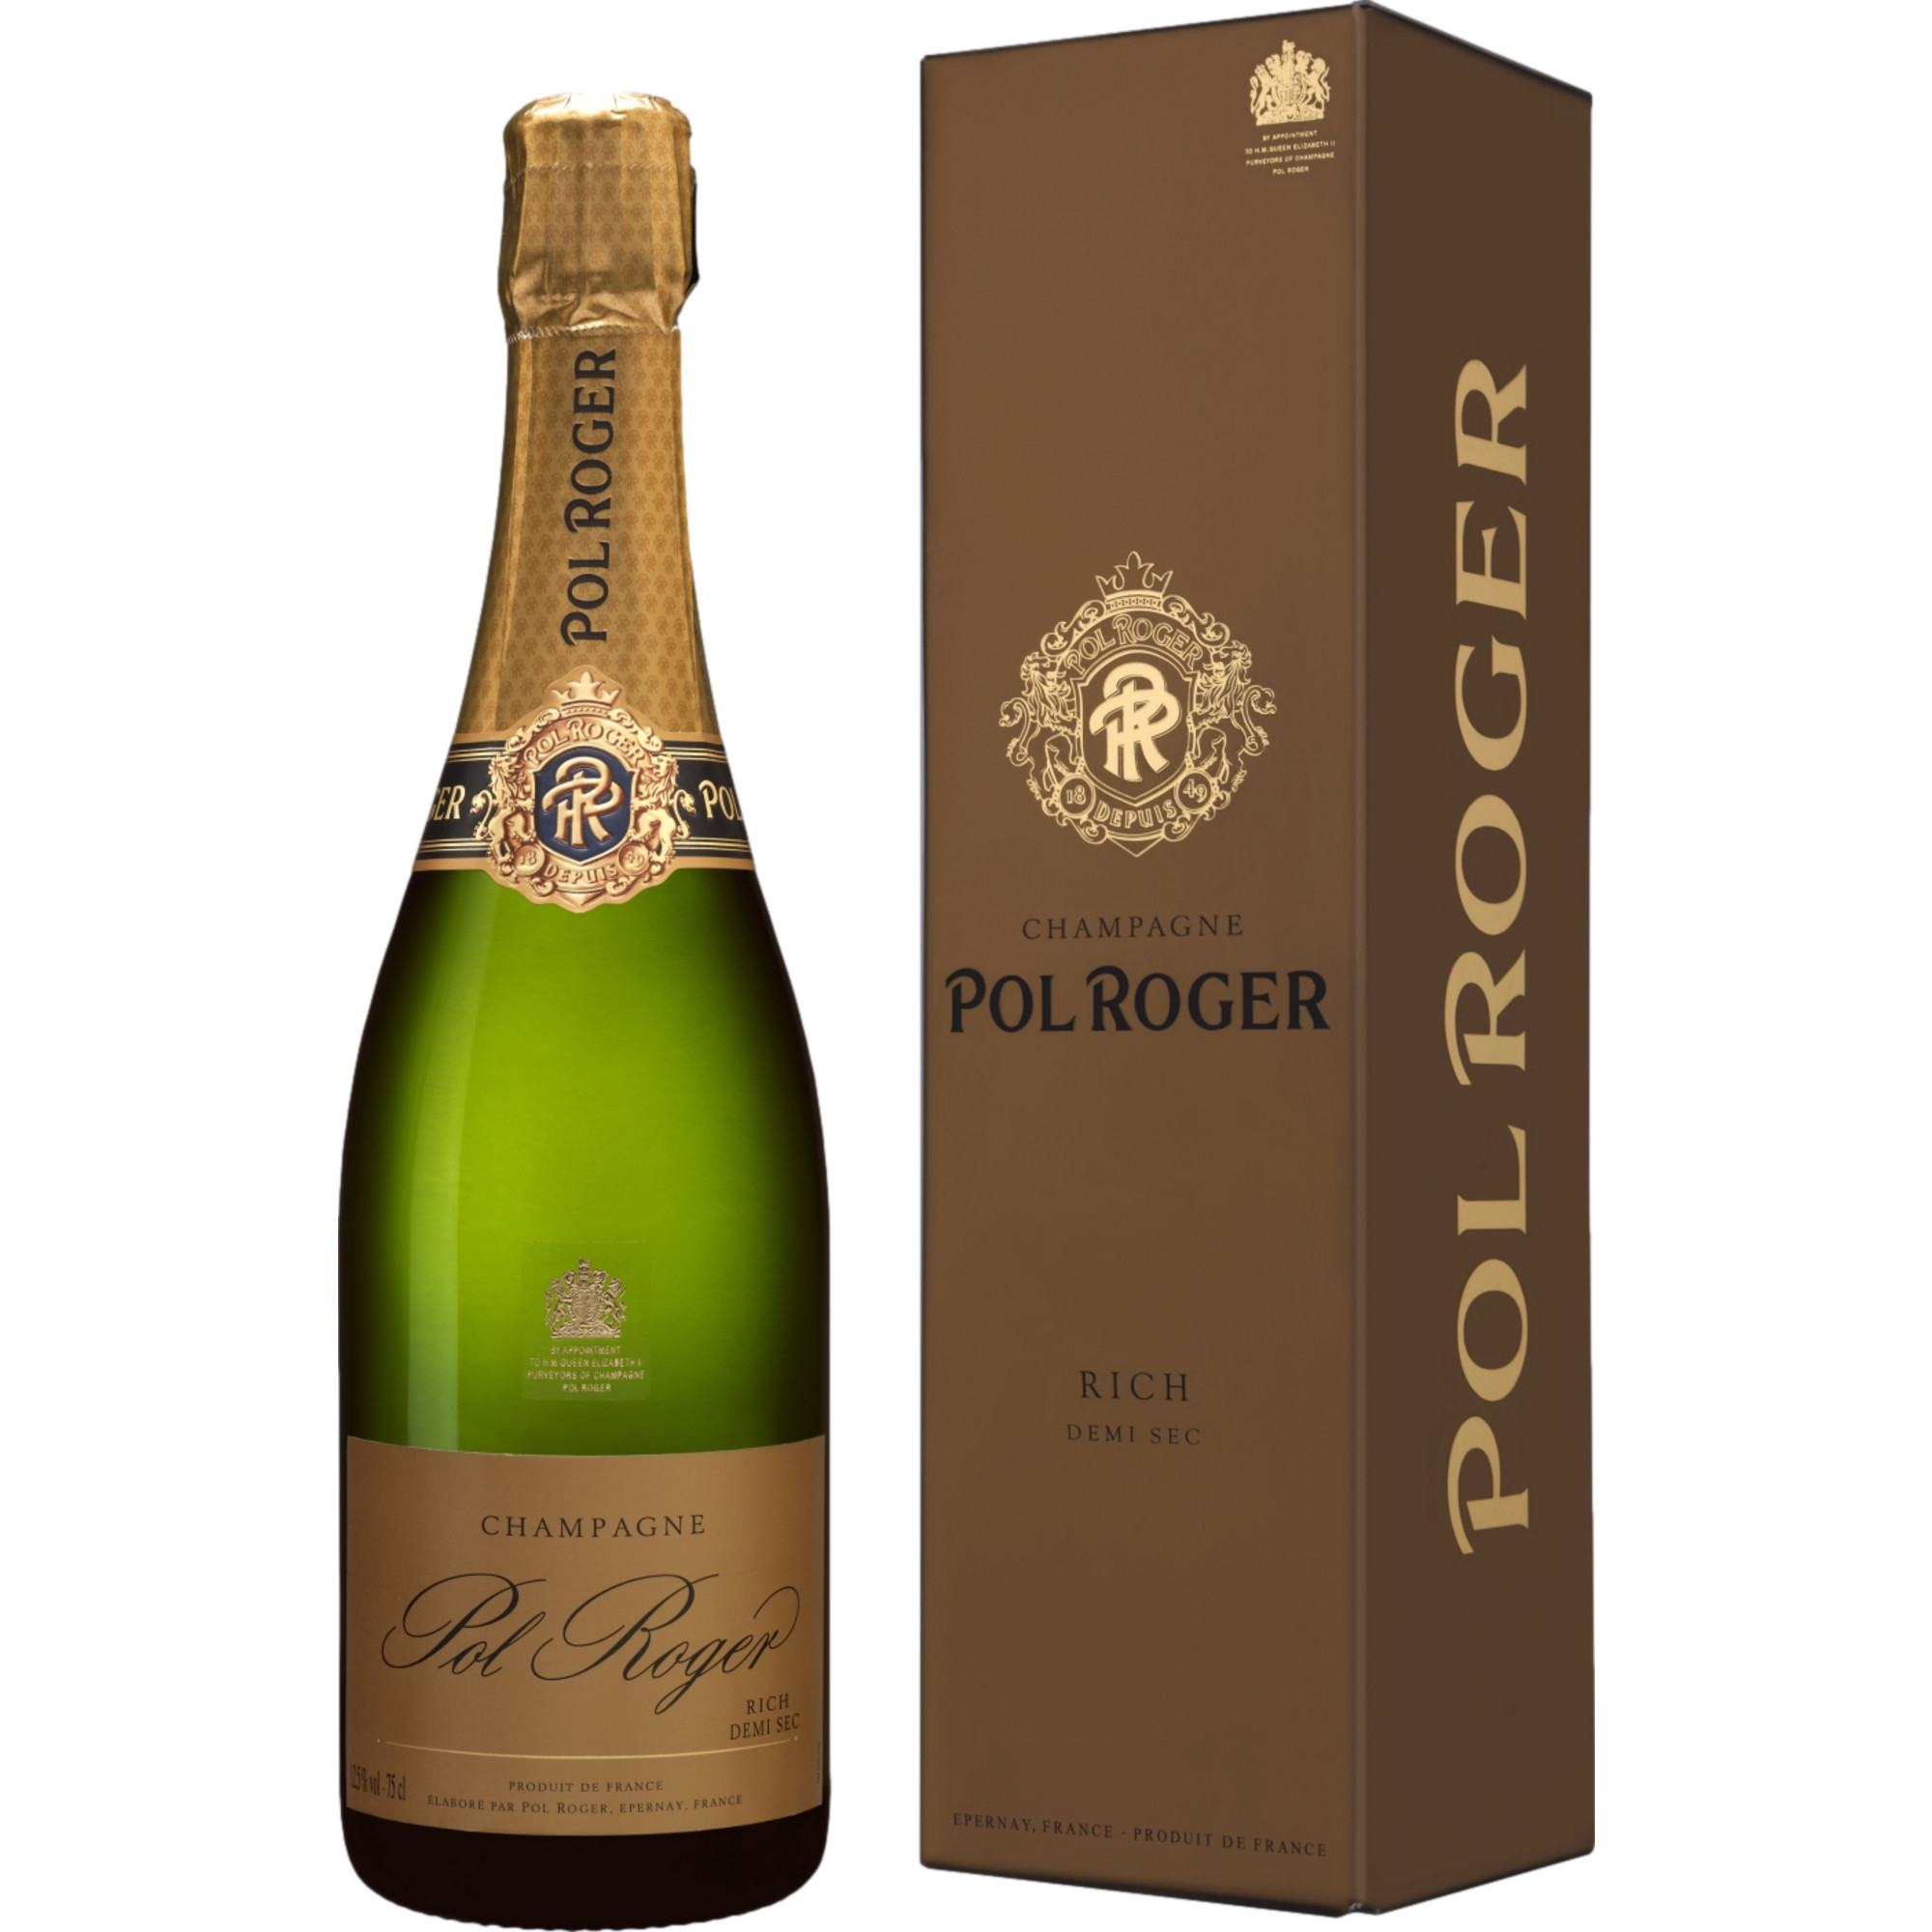 Image of Champagne Pol Roger Rich, Demi Sec, Champagne AOP, Champagne, Schaumwein